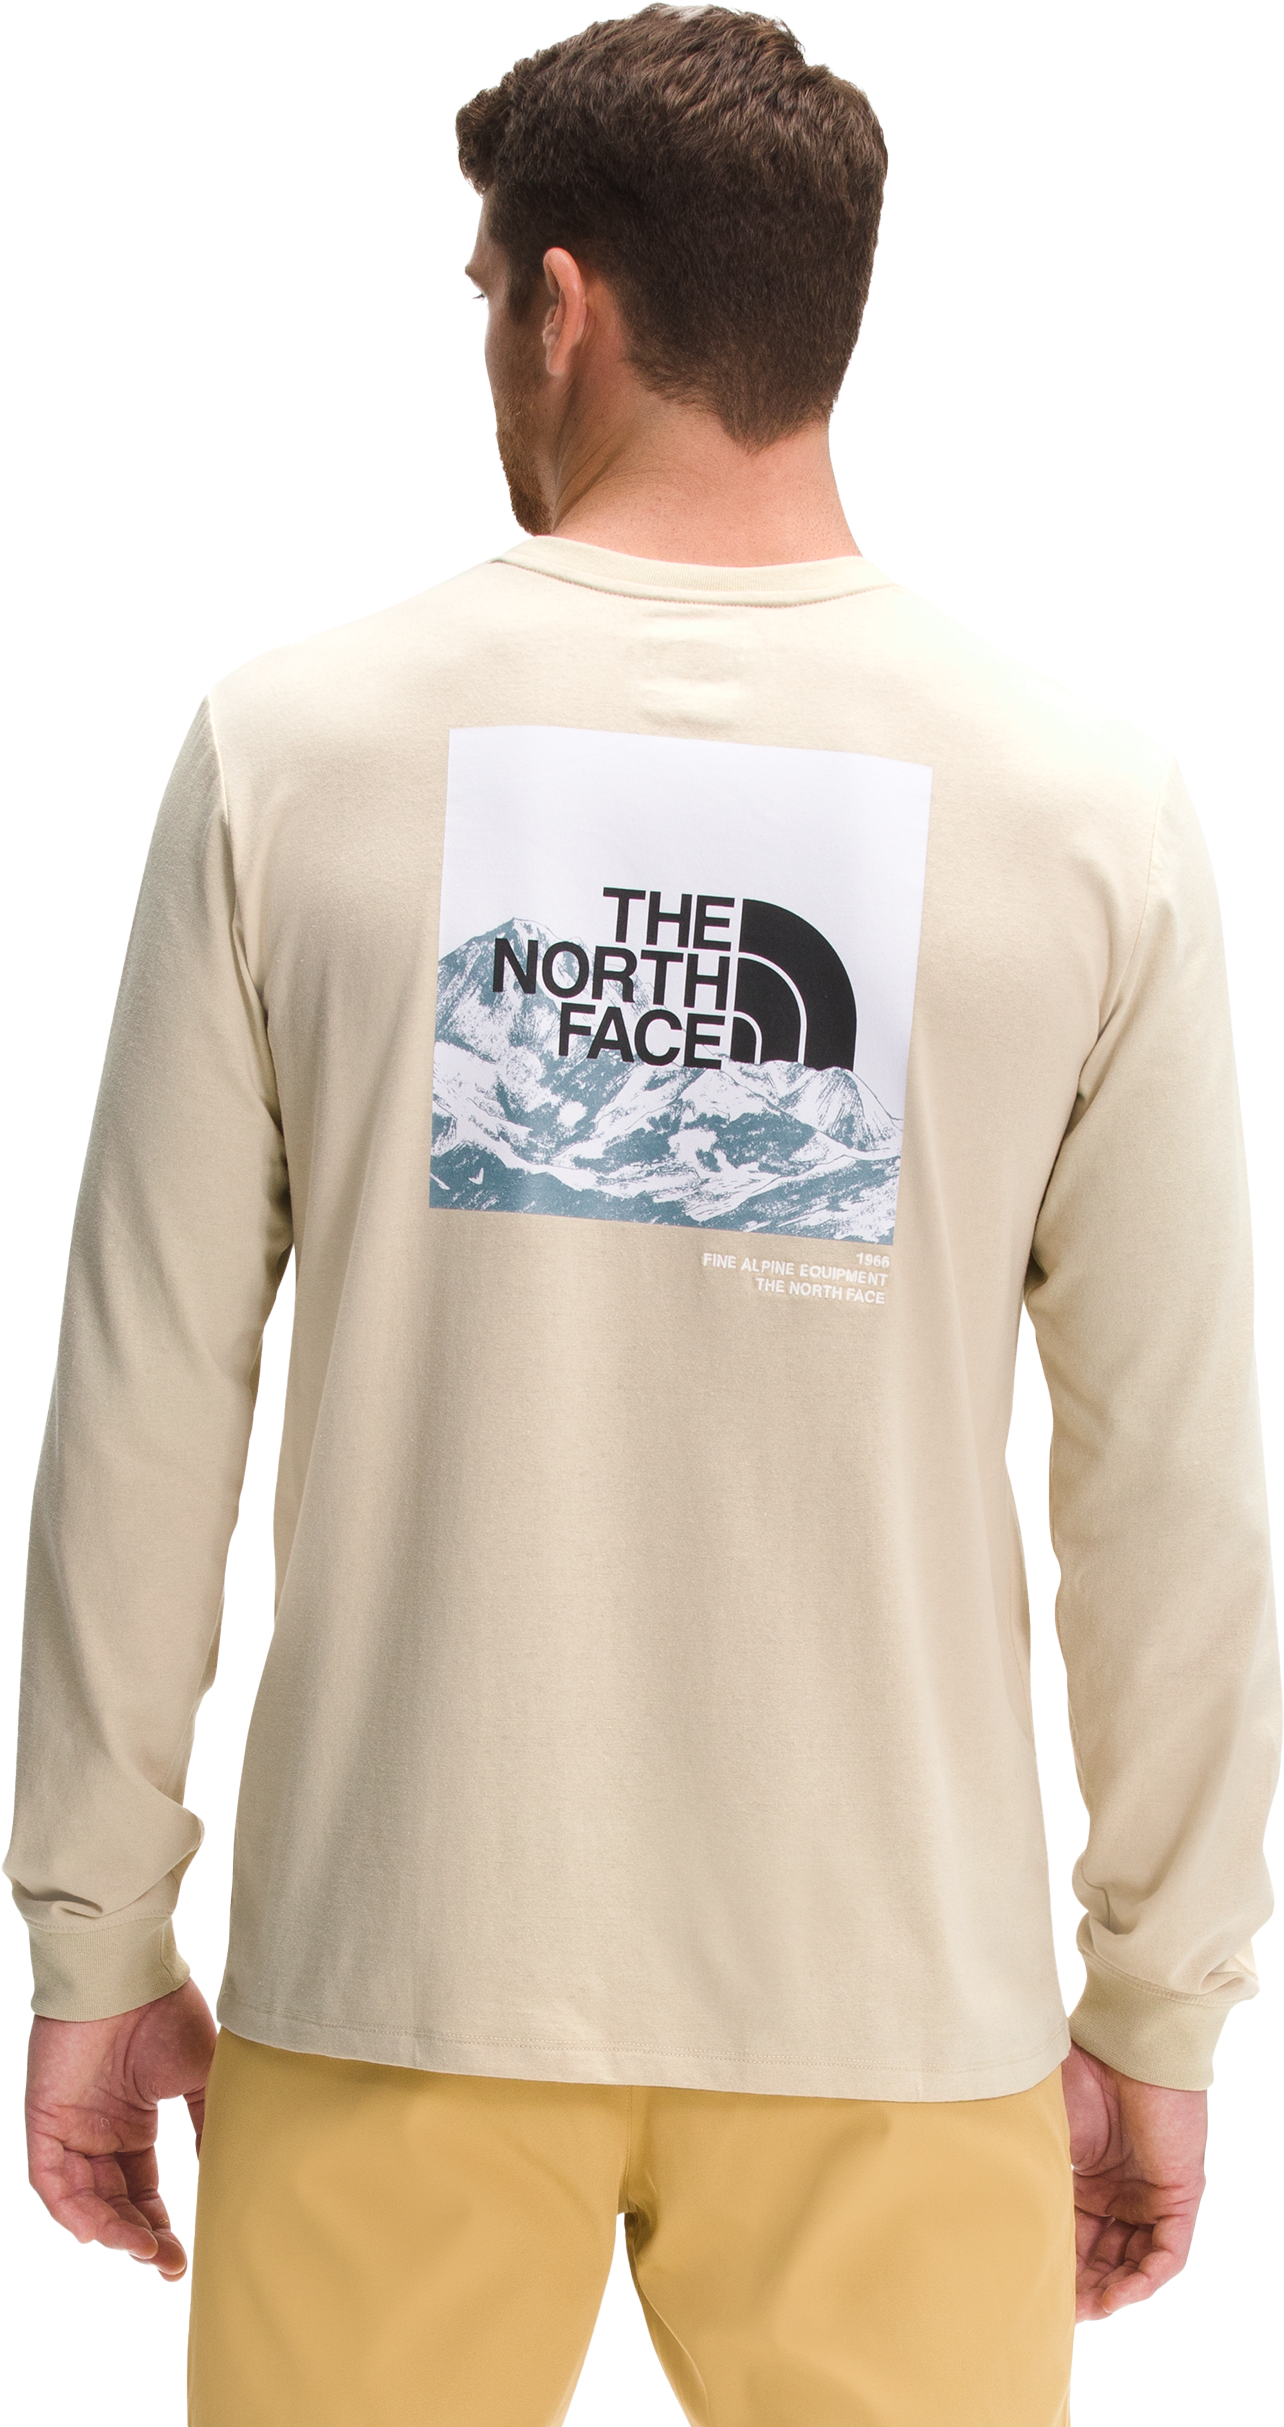 The North Face Logo Play Long-Sleeve T-Shirt for Men - Gravel - M